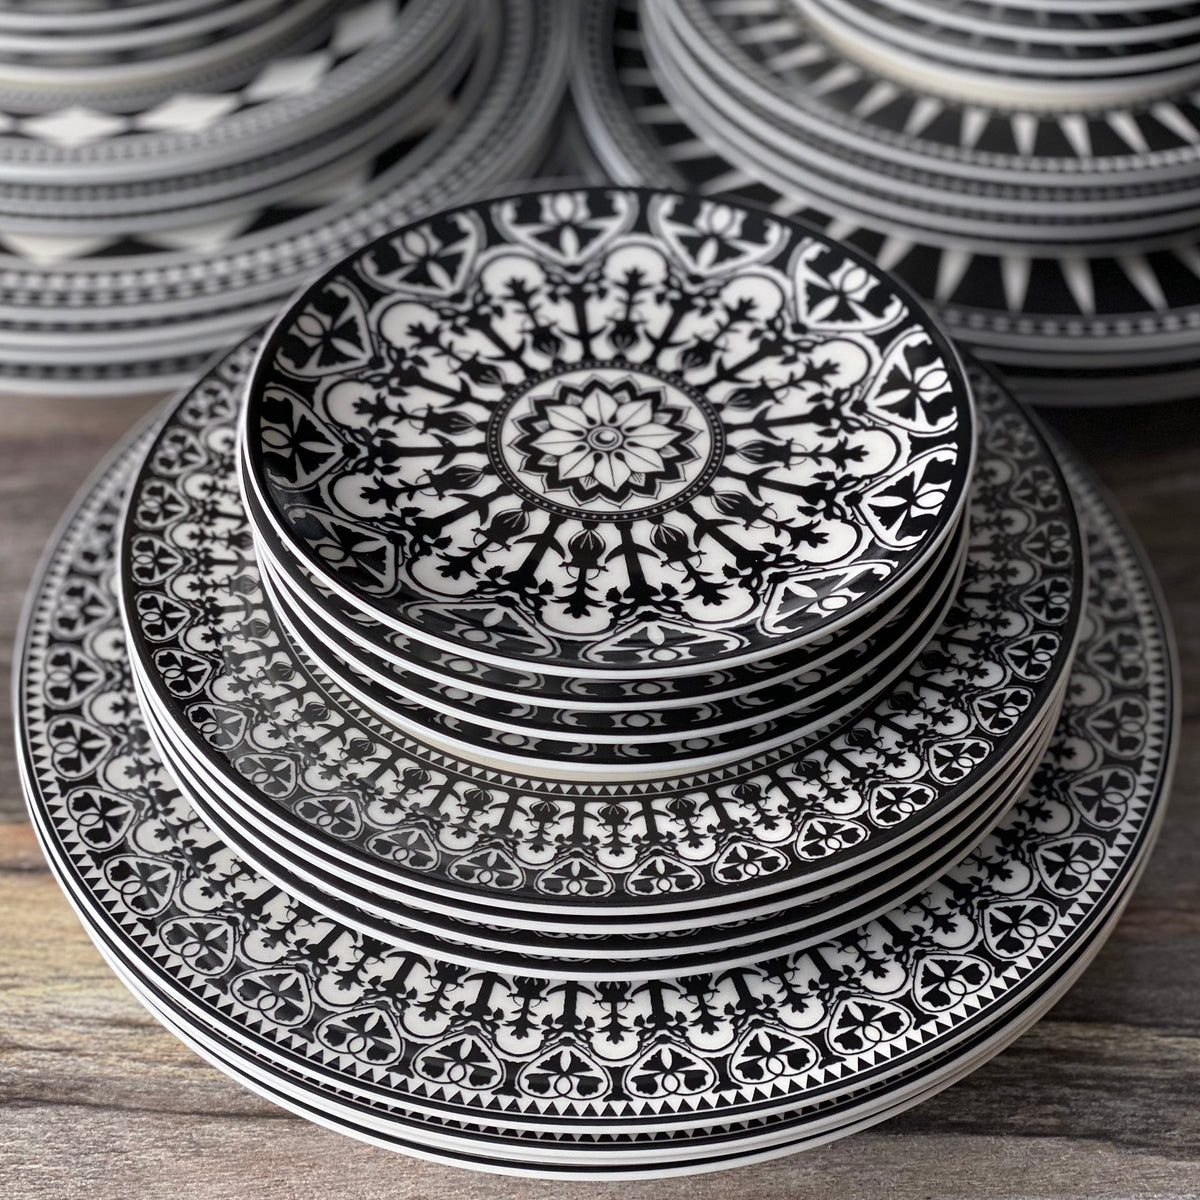 Casablanca Canapé Plates in black and white stacked on top of each other, by Caskata Artisanal Home.